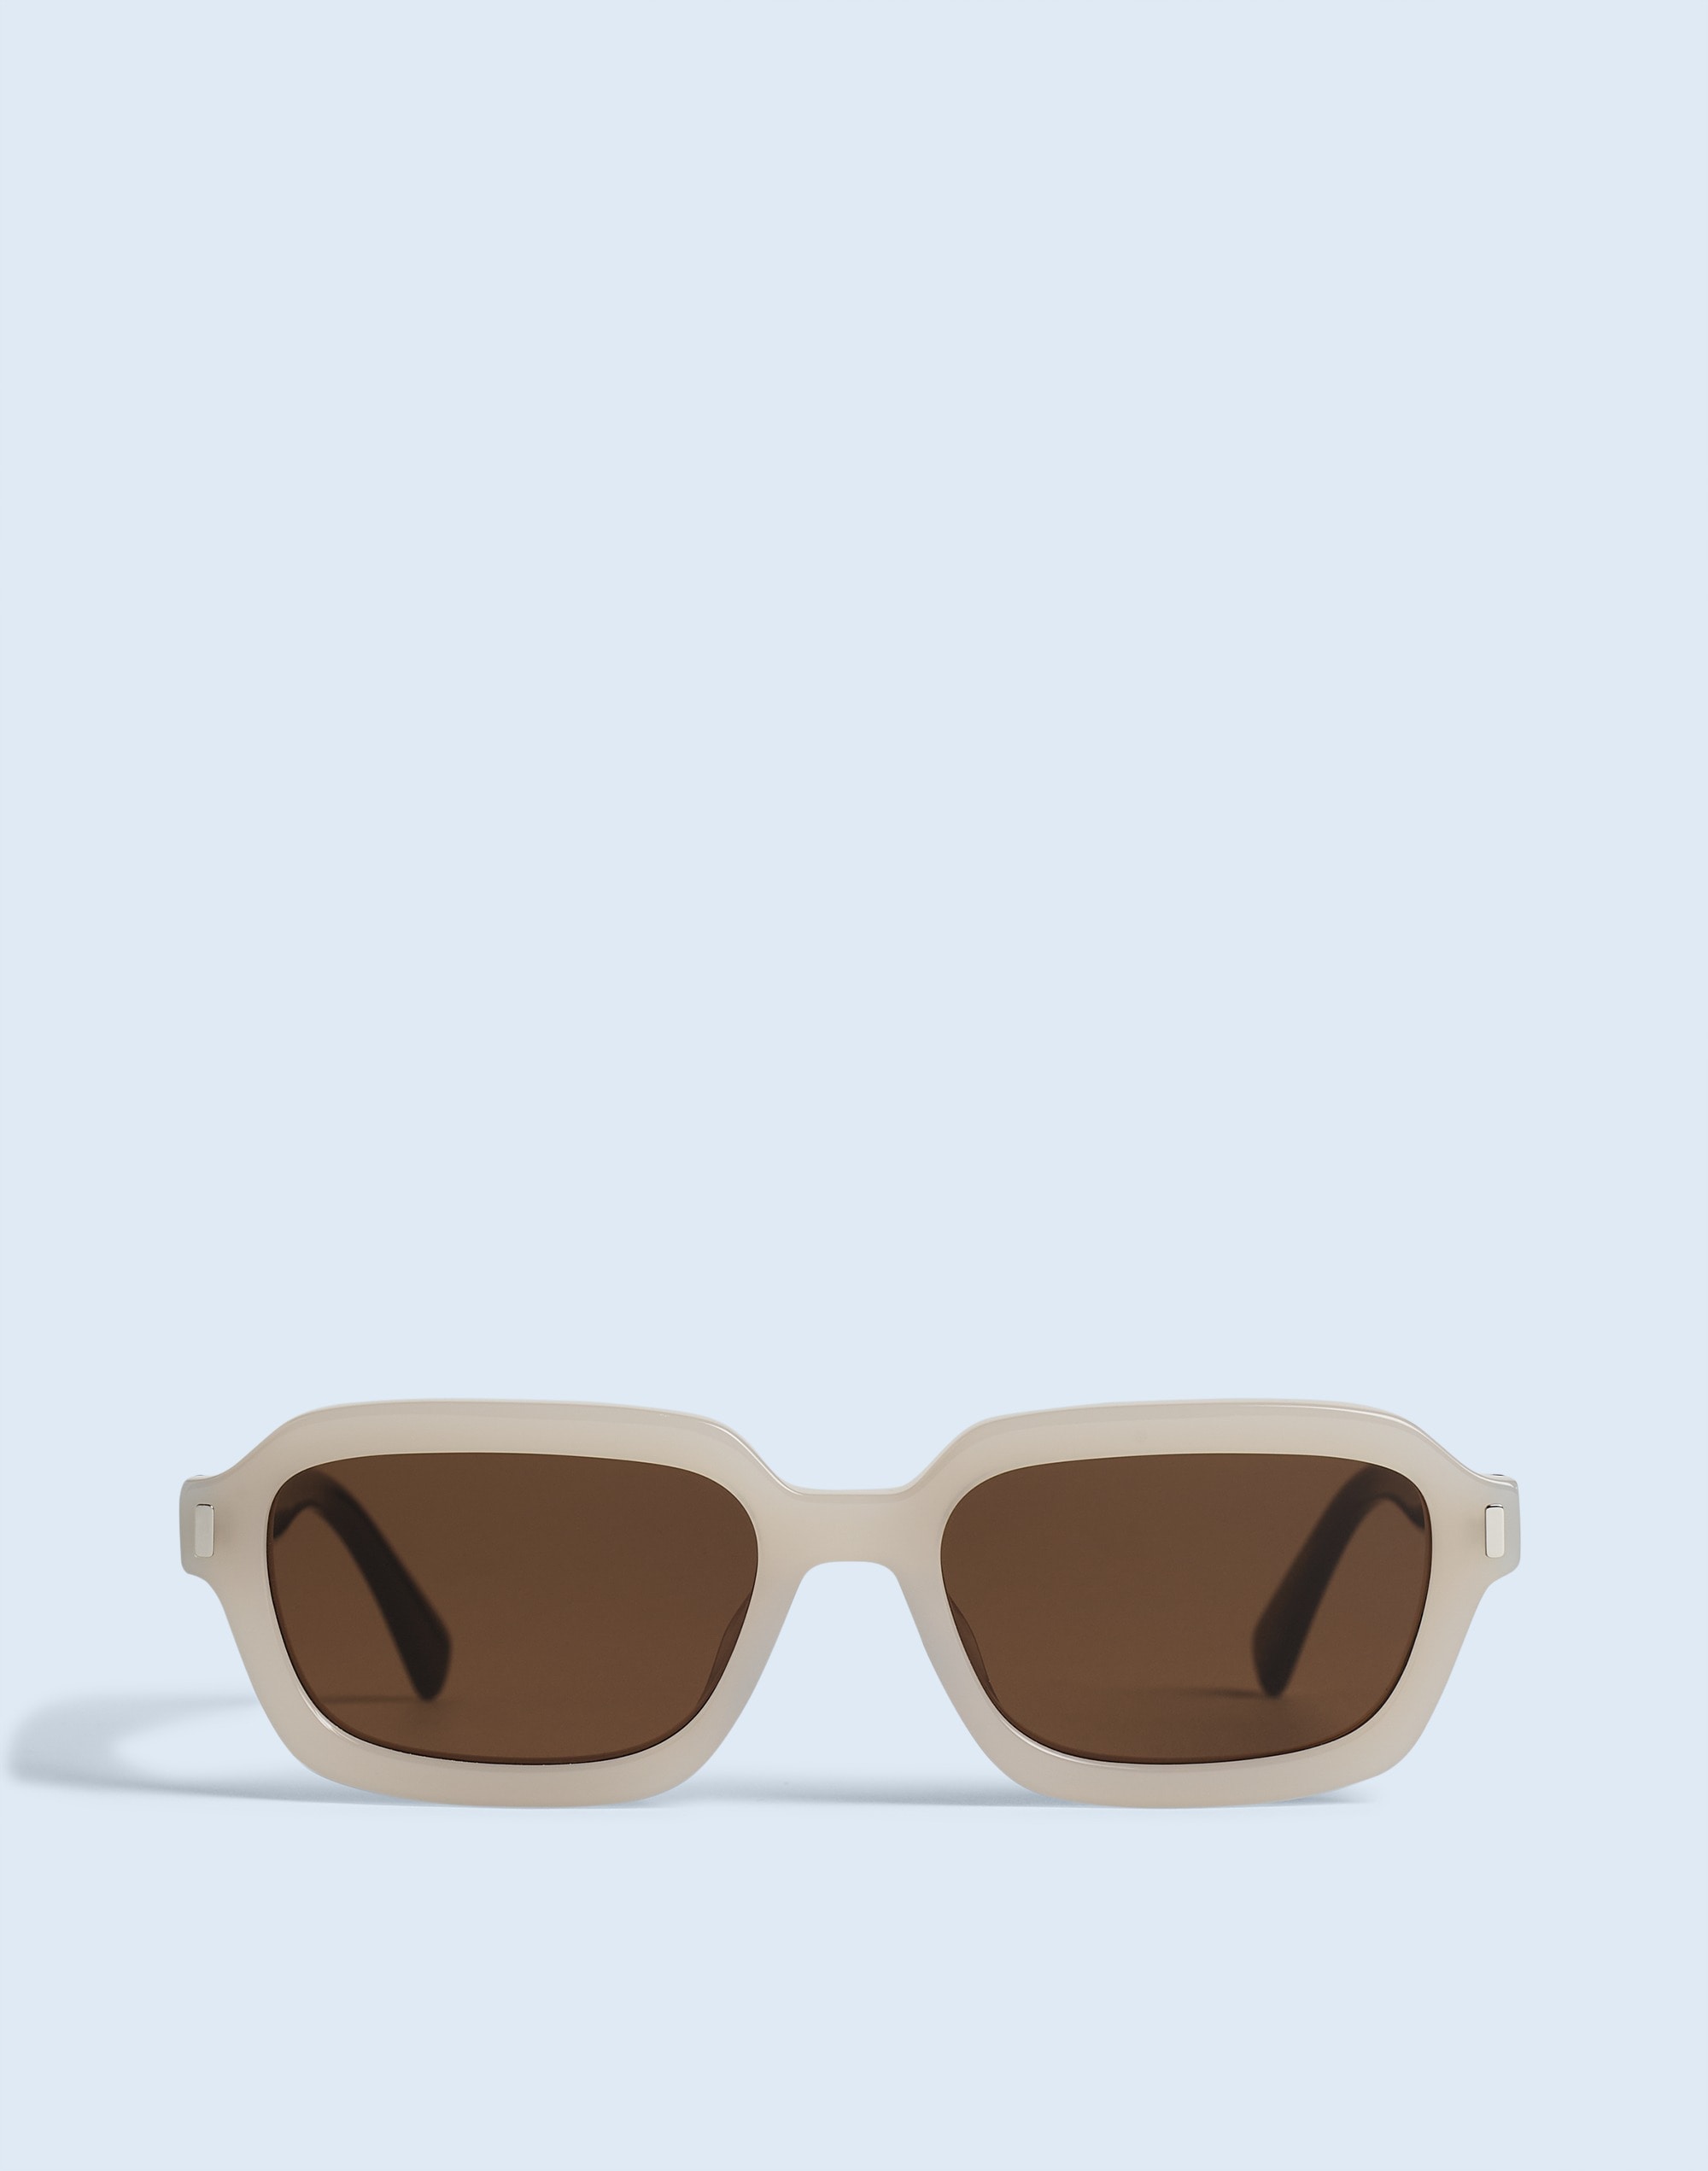 Mw Rounded Rectangle Acetate Sunglasses In Milky Cloud Cream Black